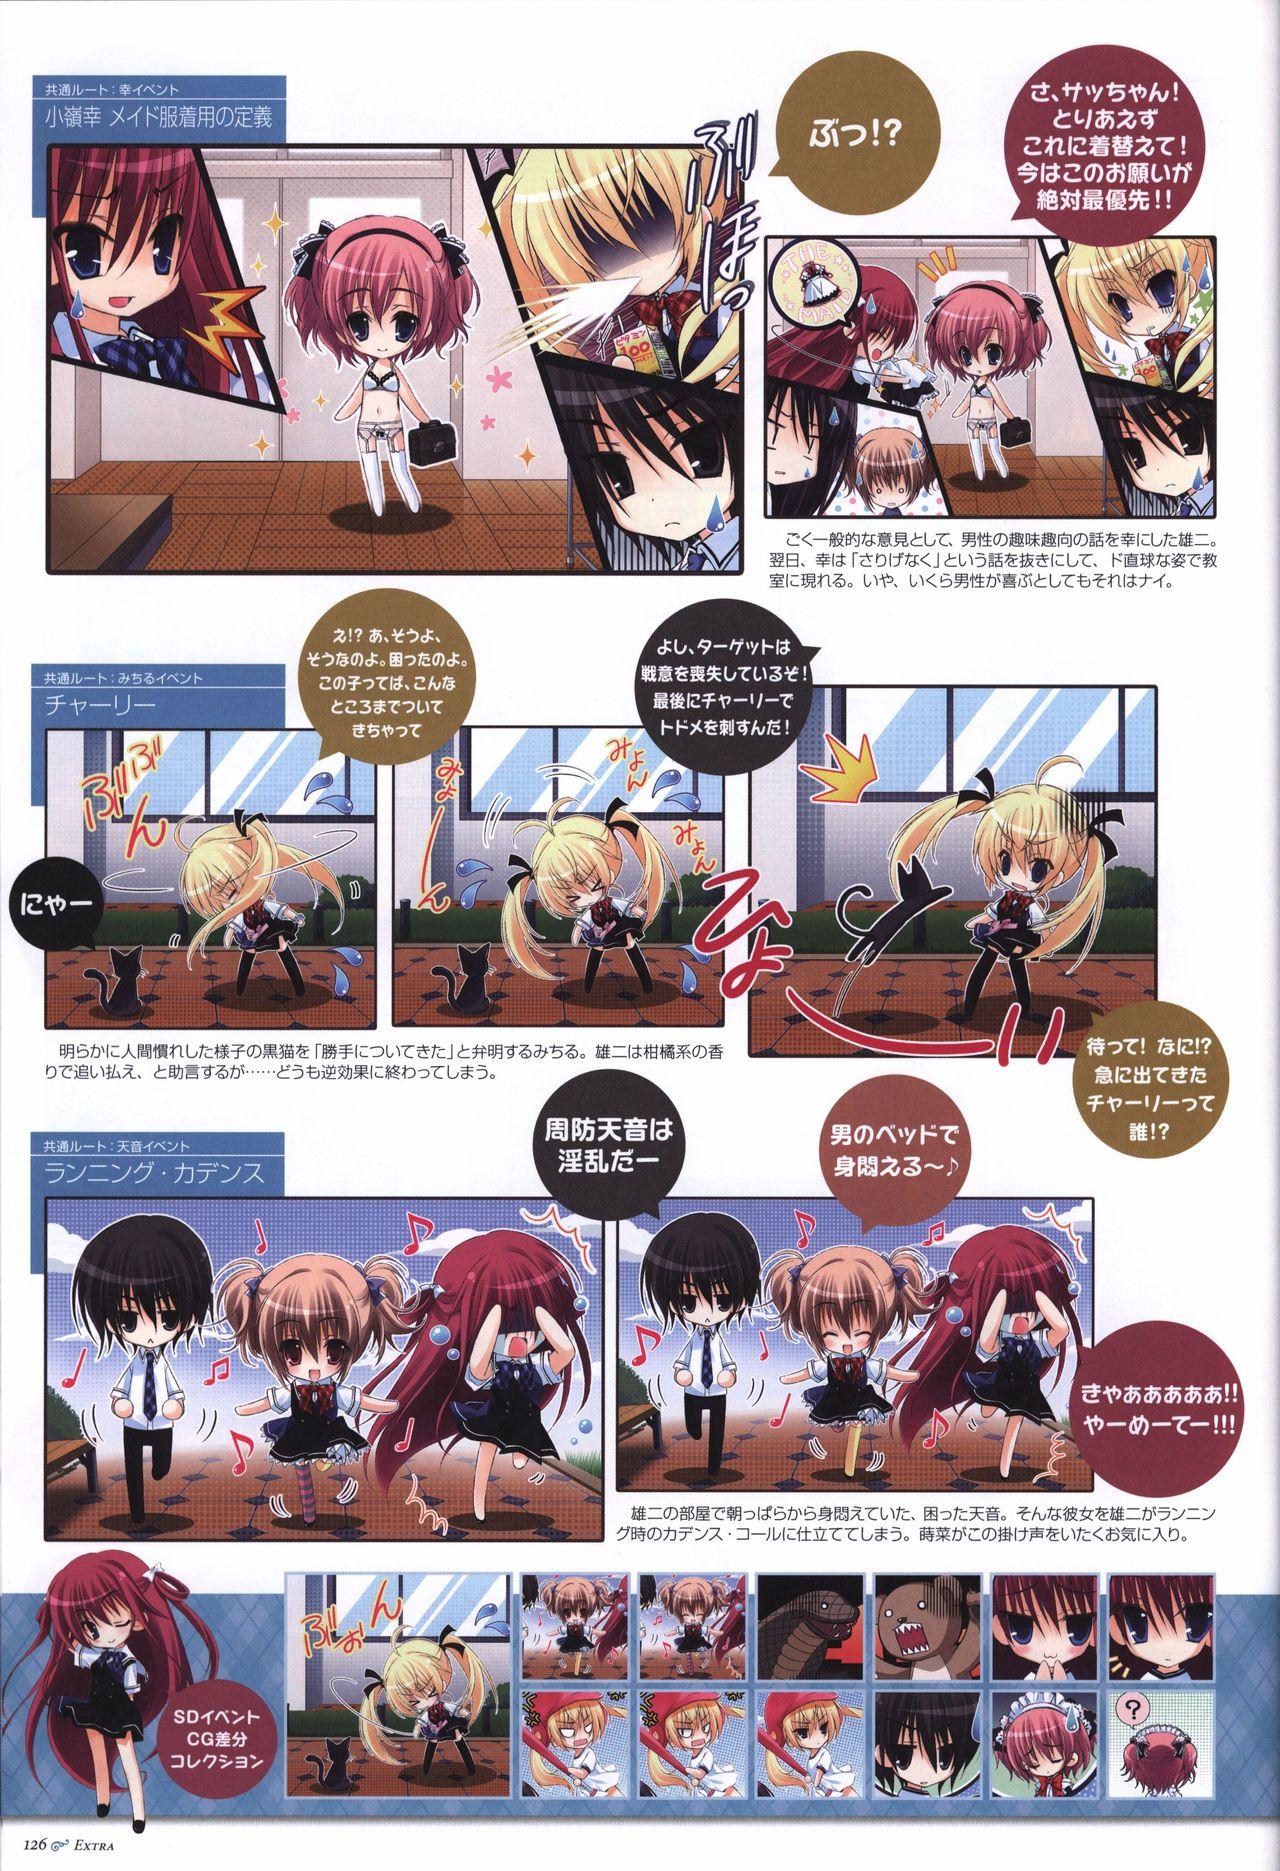 The Fruit of Grisaia Visual FanBook 126